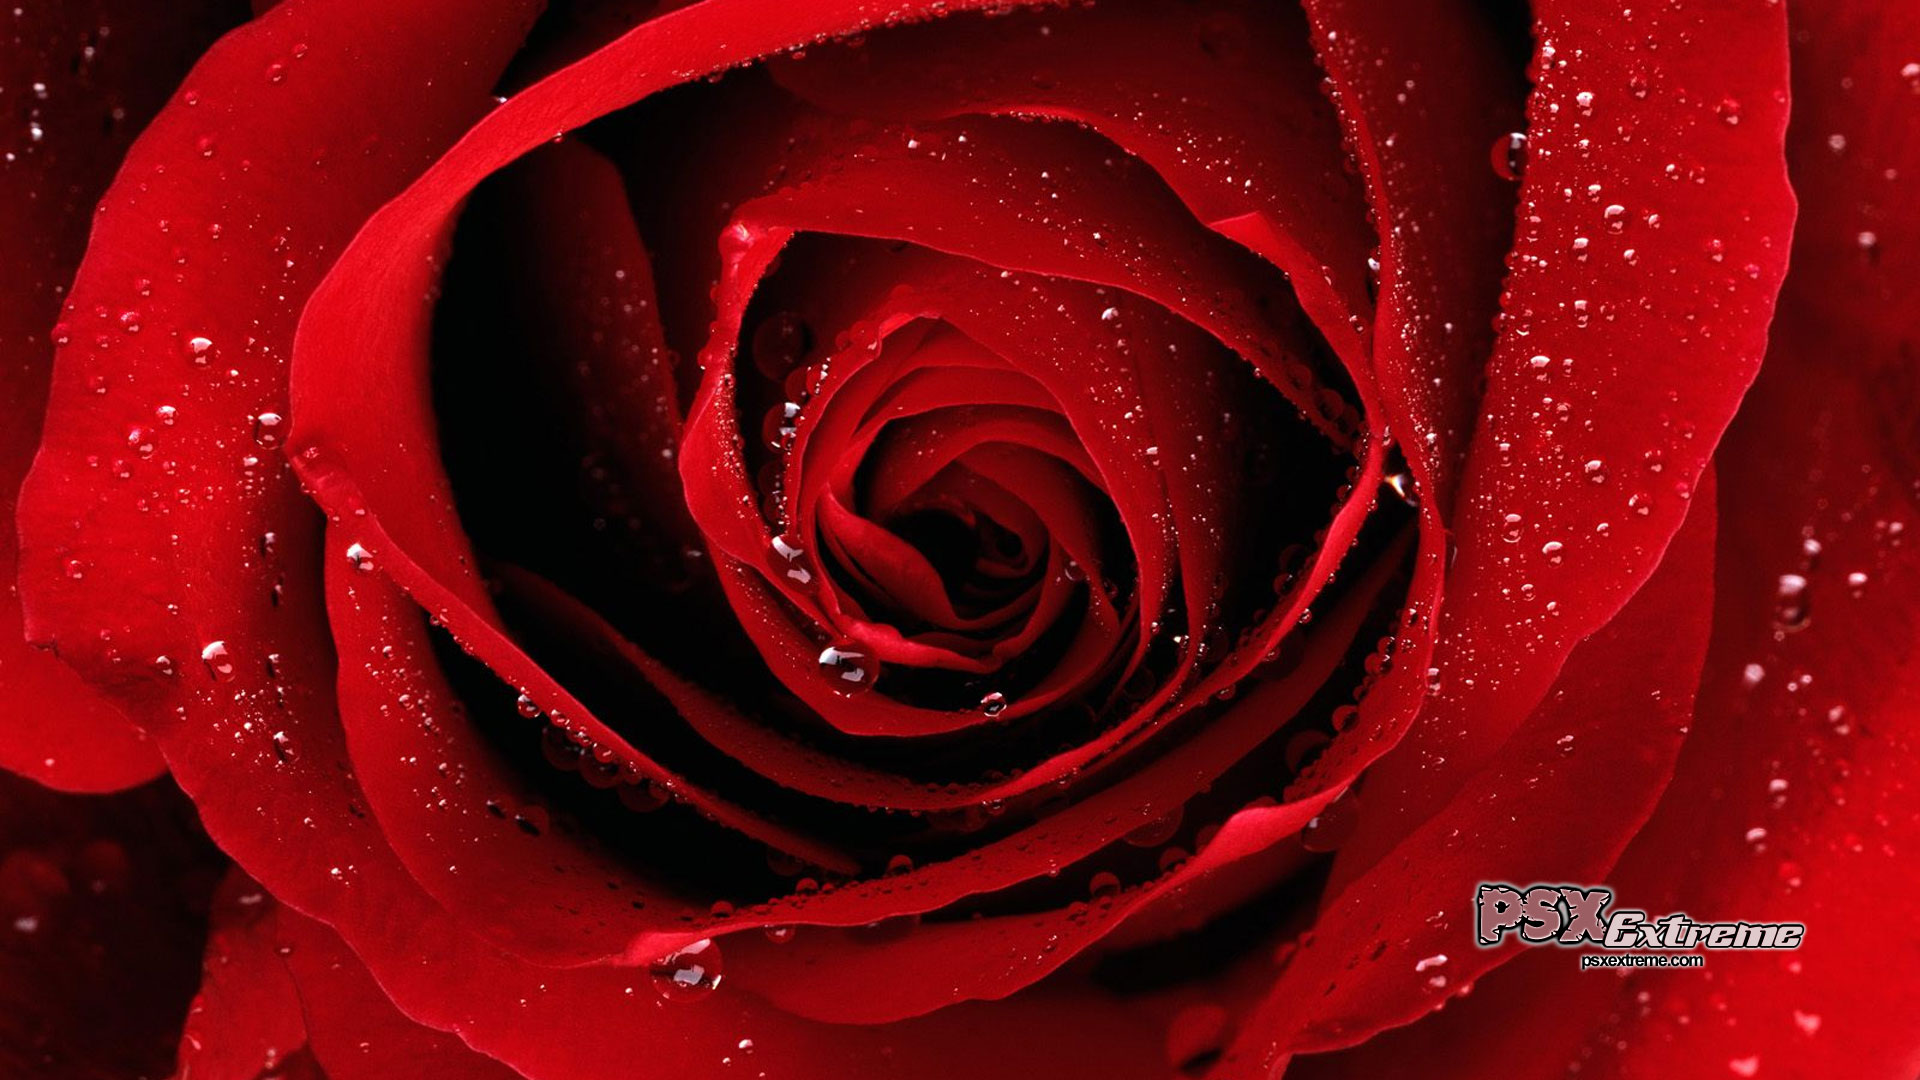 Red Rose Wallpapers